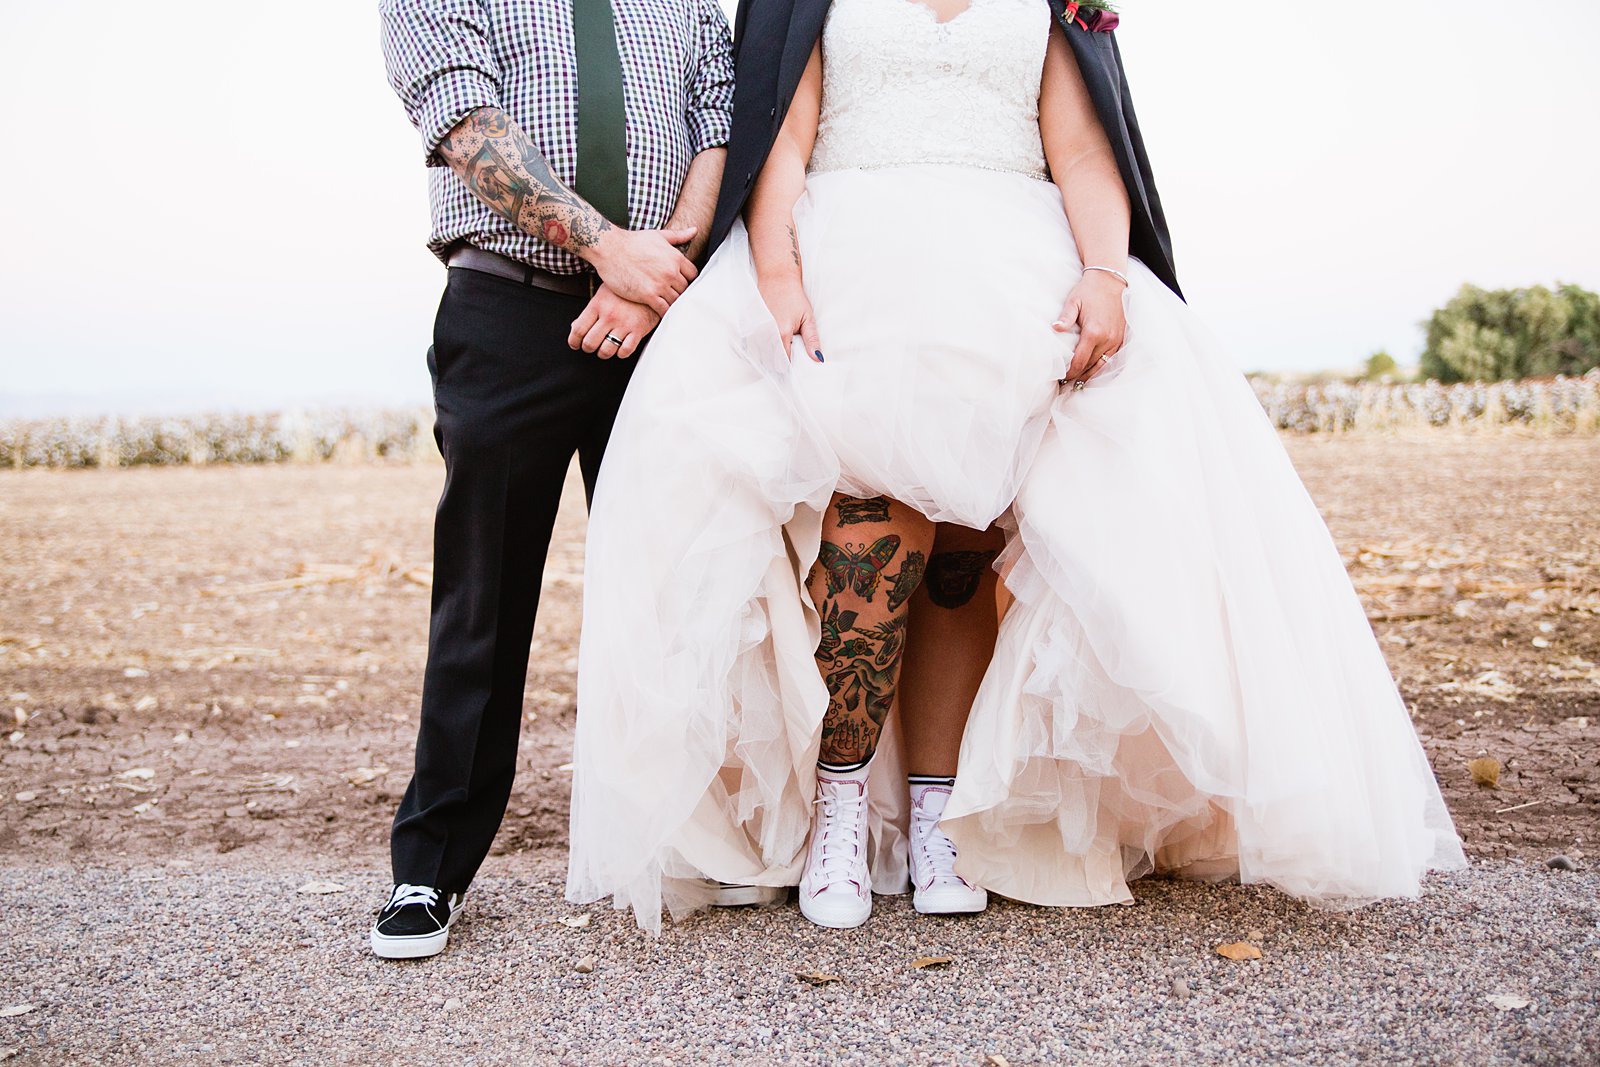 Bride and groom pose for a picture showing off their tattoos on their wedding day.